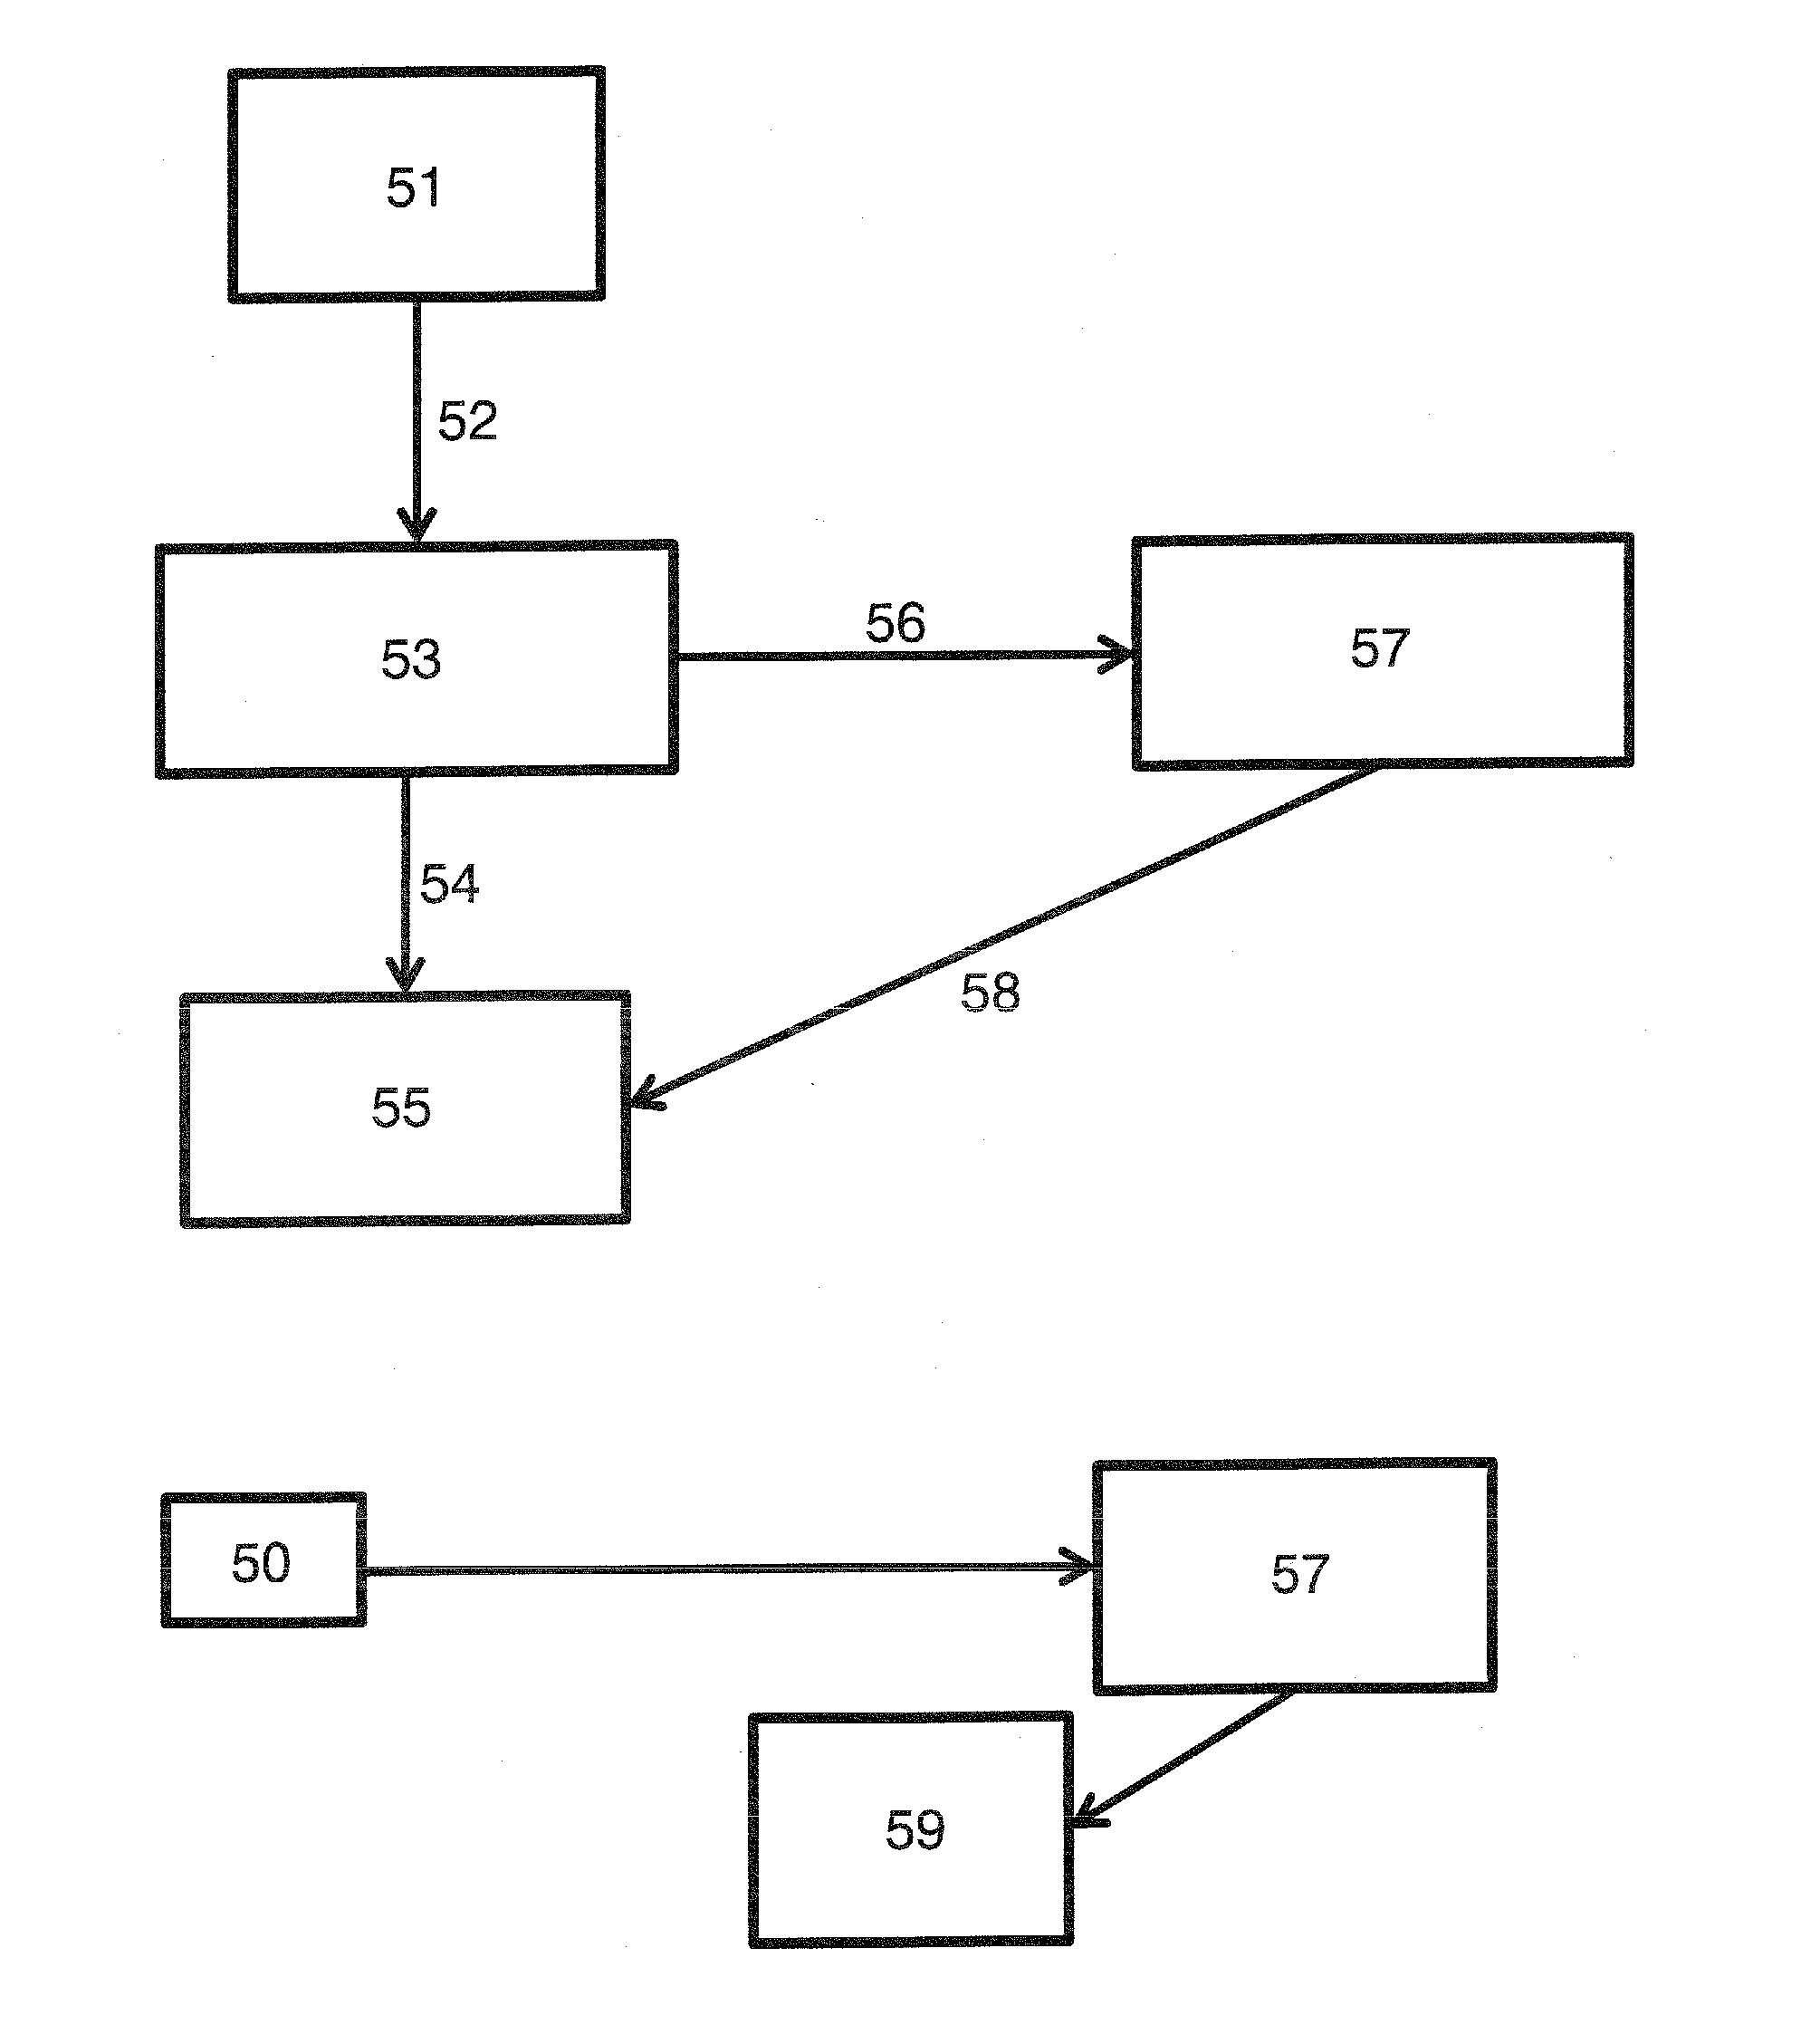 Method for network resources allocation in tispan based service architectures